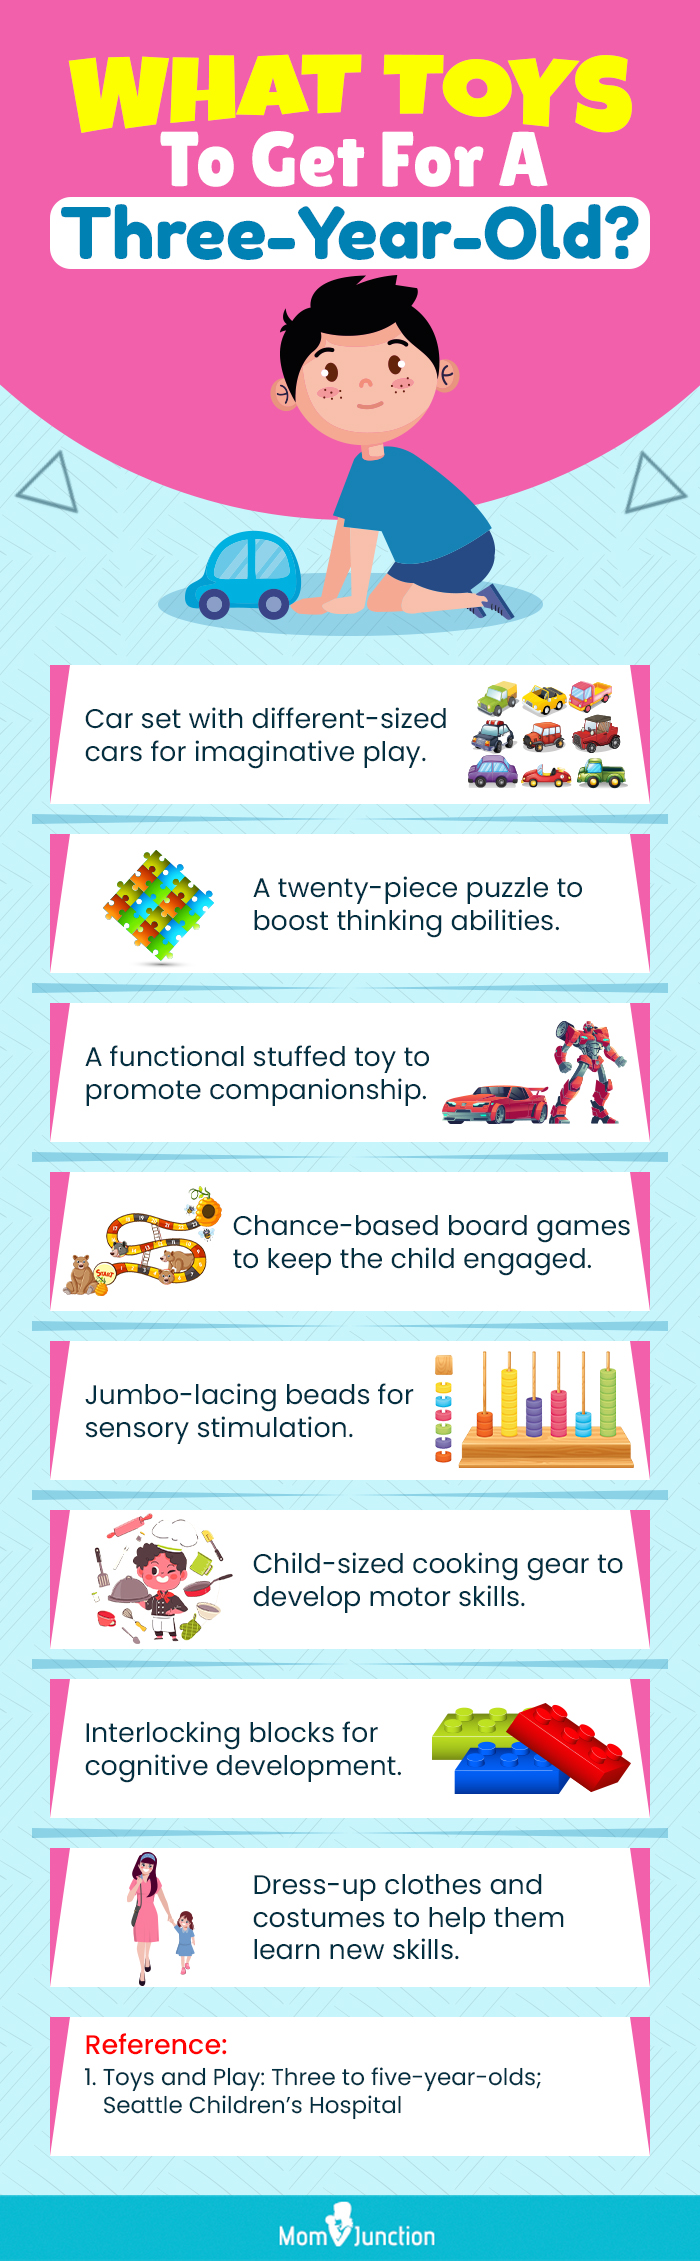 What Toys To Get For A Three-Year-Old (Infographic)